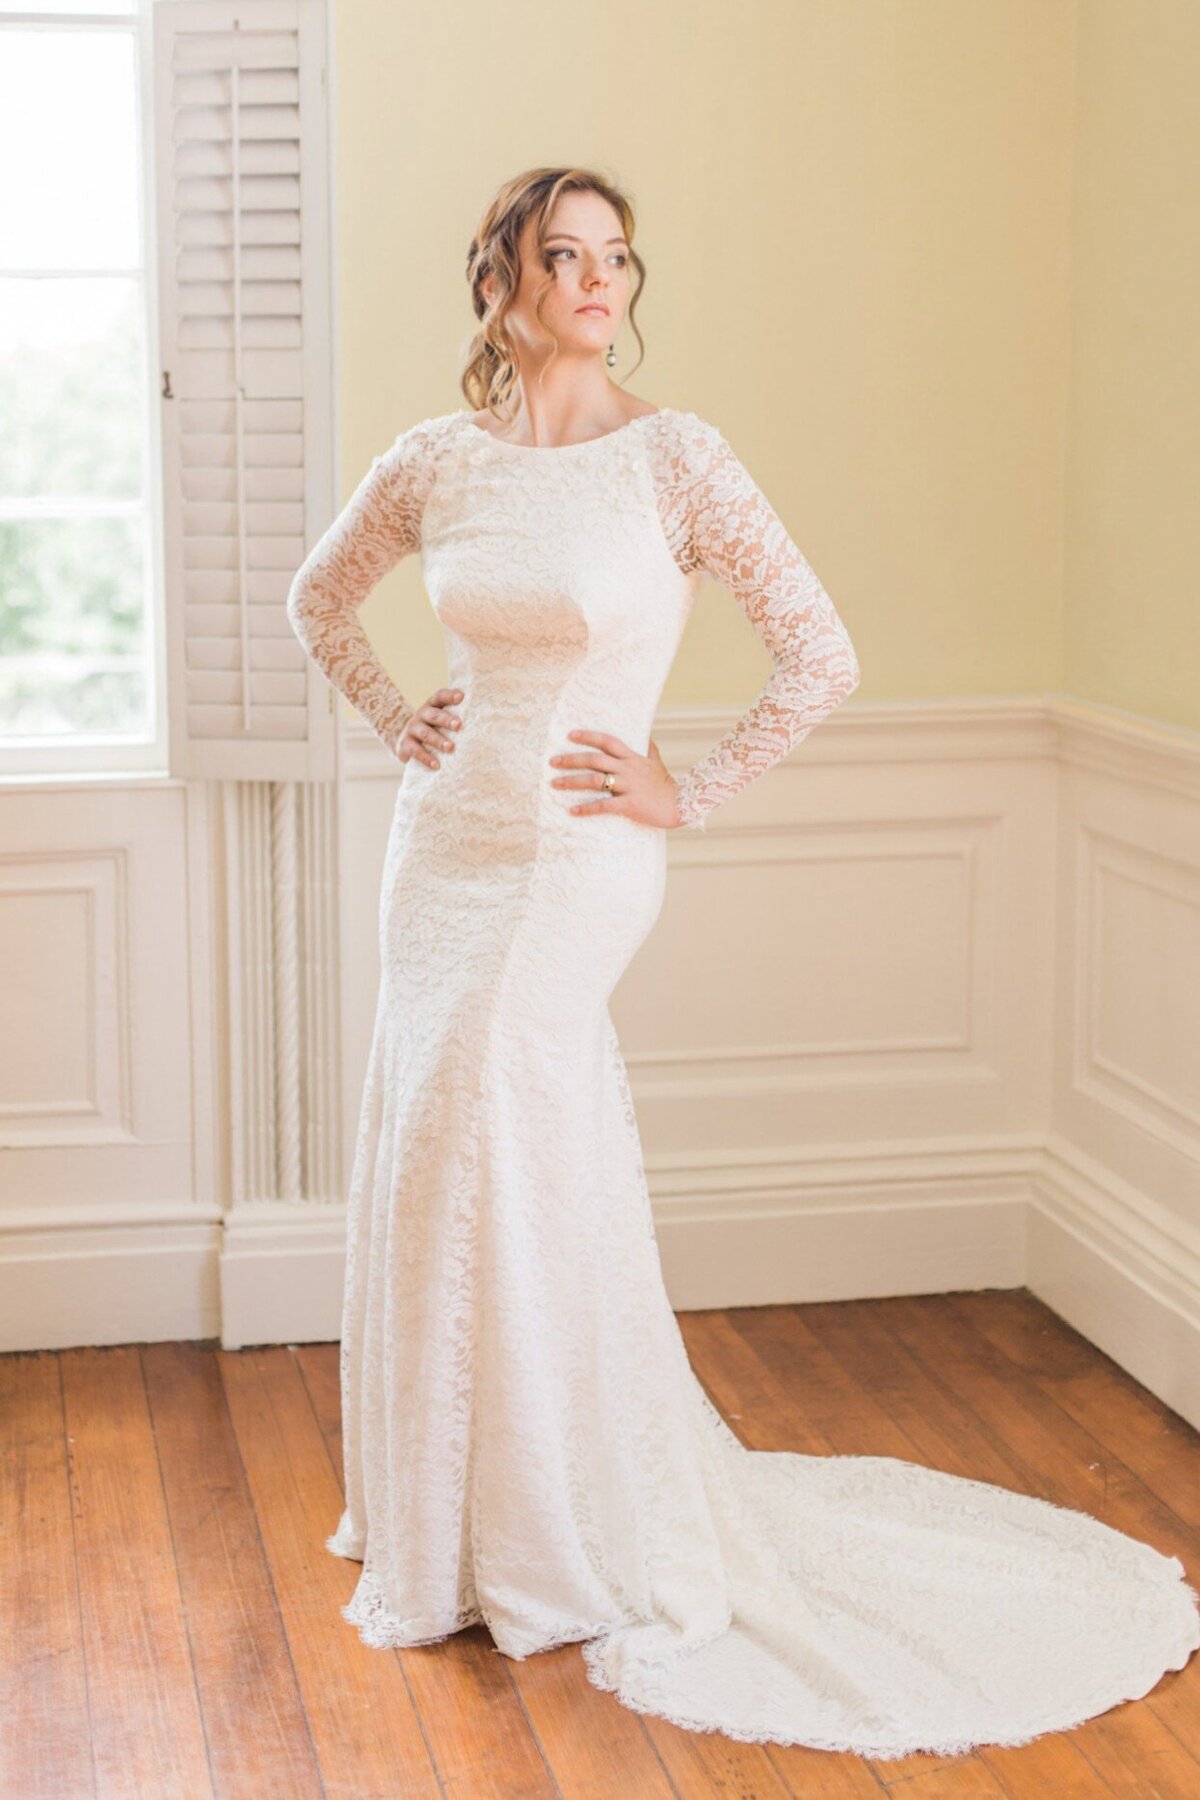 Hudson is a crepe and lace wedding dress with long sleeves in a subtle fit-and-flare silhouette by bridal designer Edith Elan.